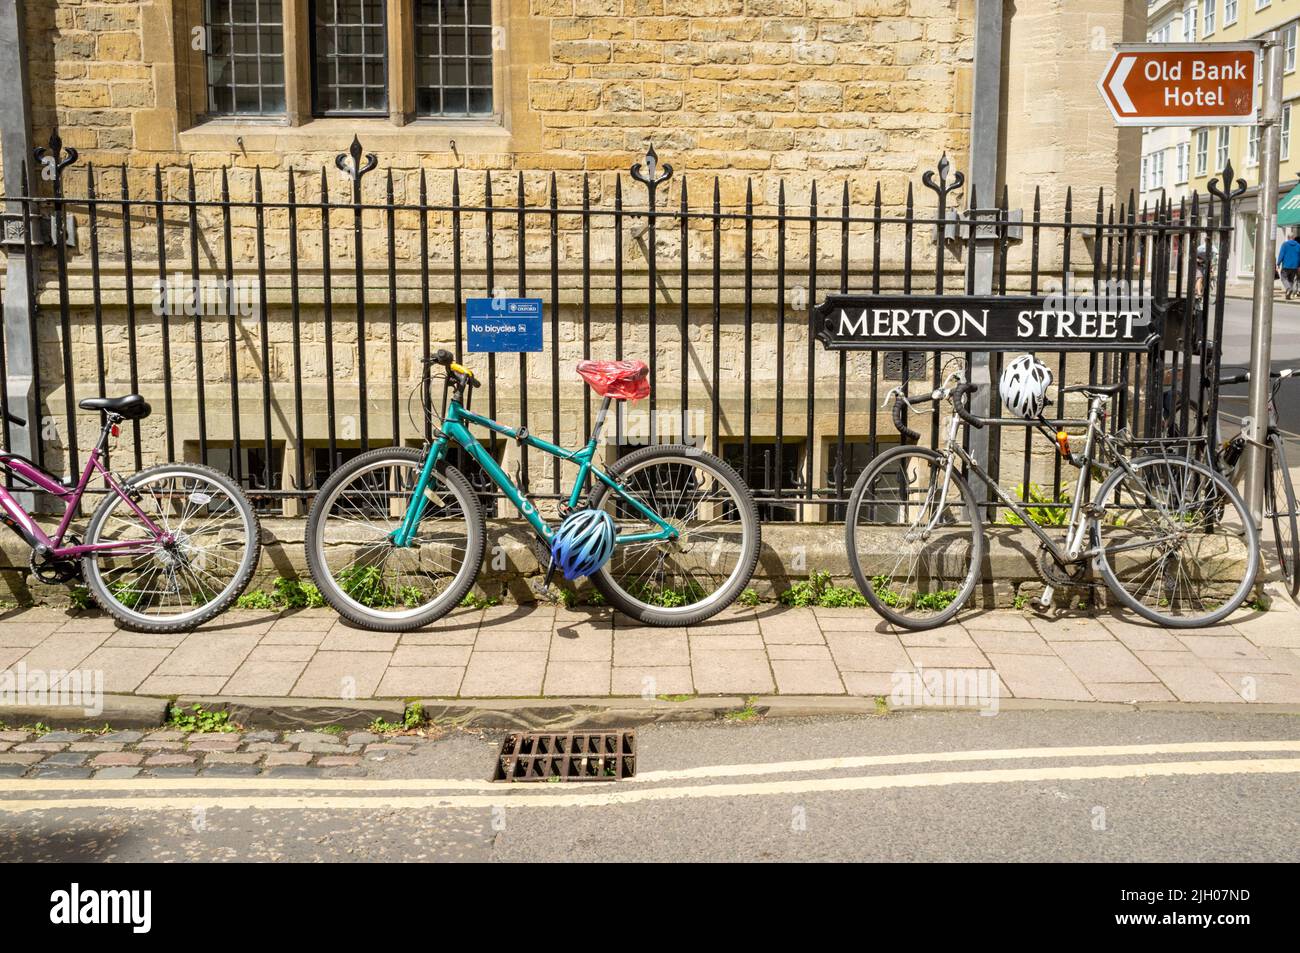 Student bicycles against a railing fence, Merton Street, Oxford, UK Stock Photo